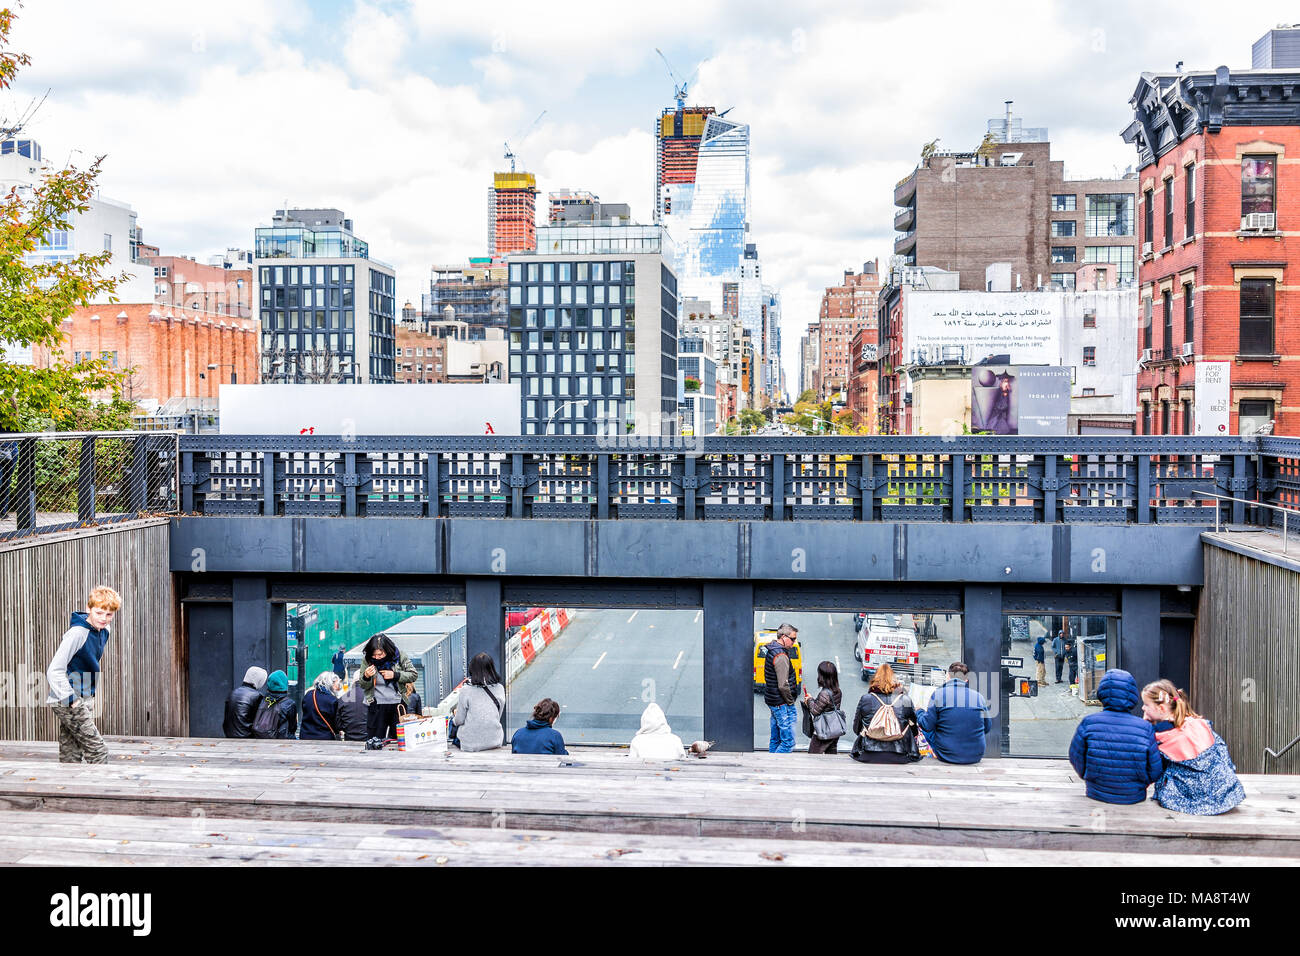 New York City, USA - October 30, 2017: Highline, high line, urban garden in NYC with many people tourists, sitting in Chelsea West Side by Hudson Yard Stock Photo